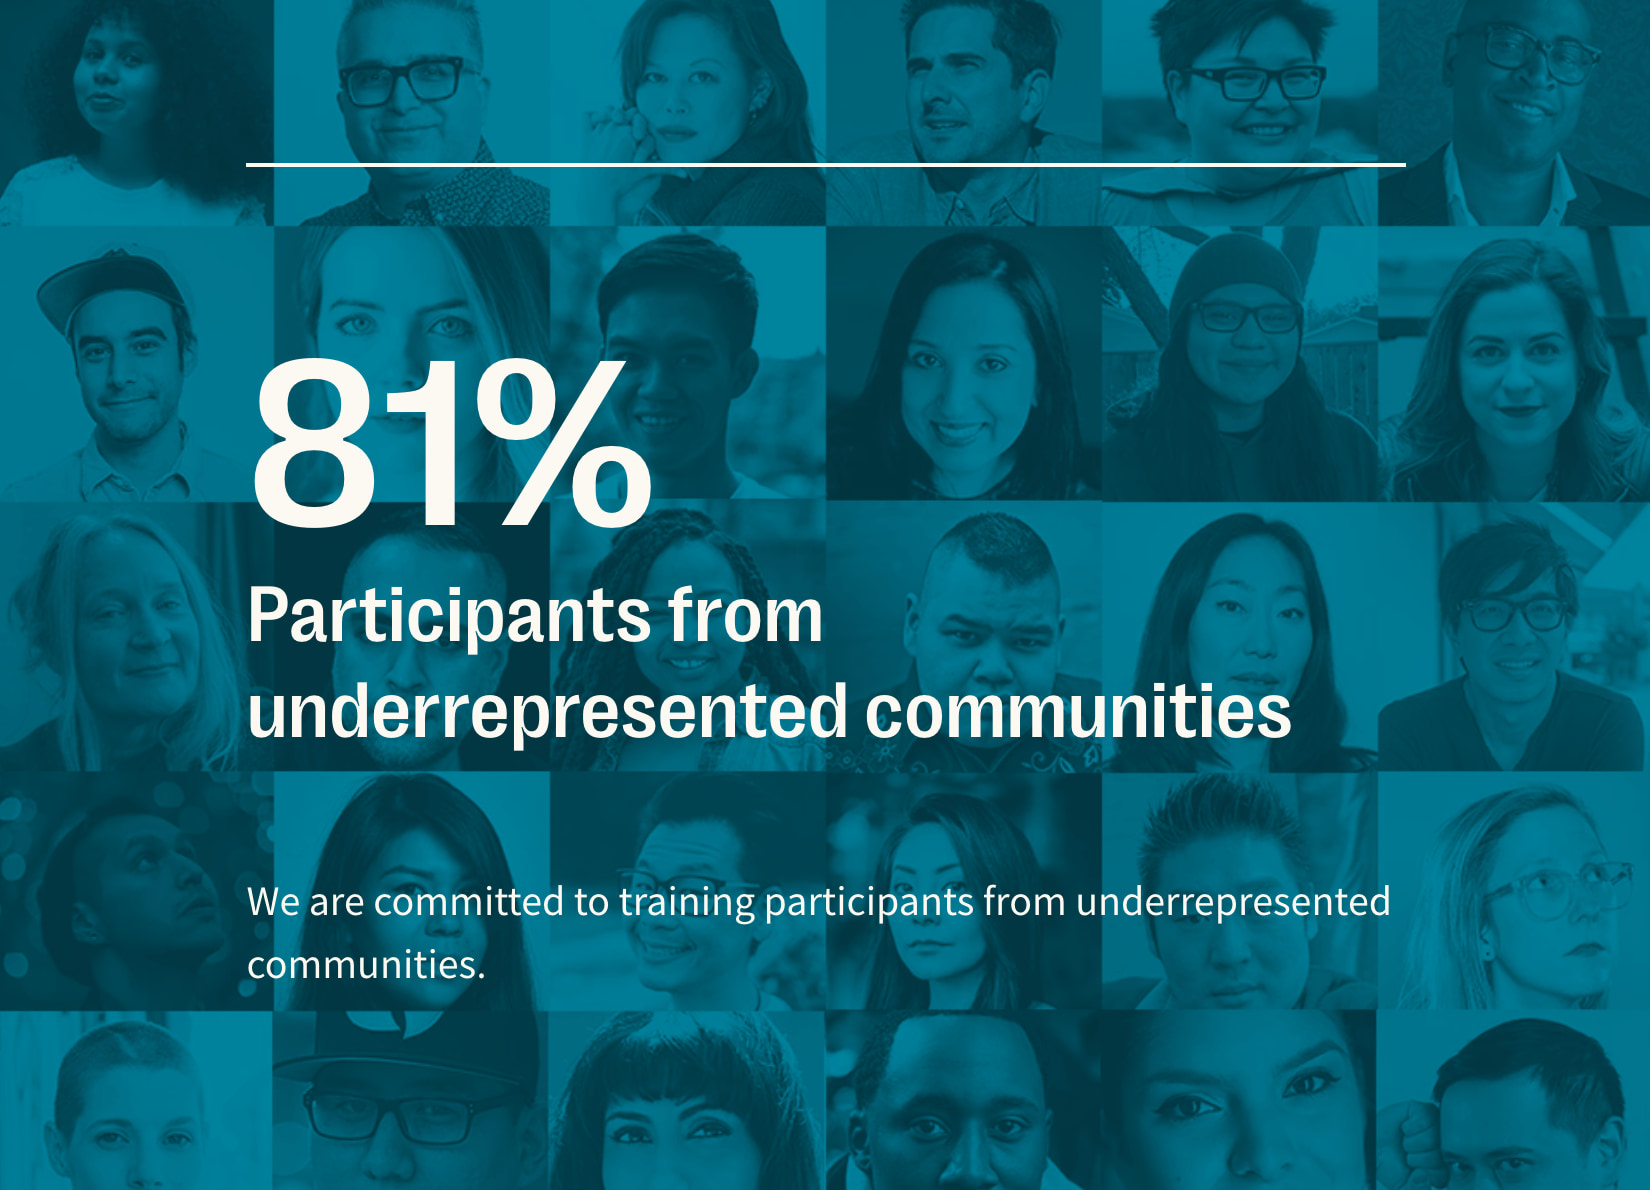 A stastistic from the NSI website: 81% rticipants from underrepresented communities. We are commited to training participants from underrepresented communities.